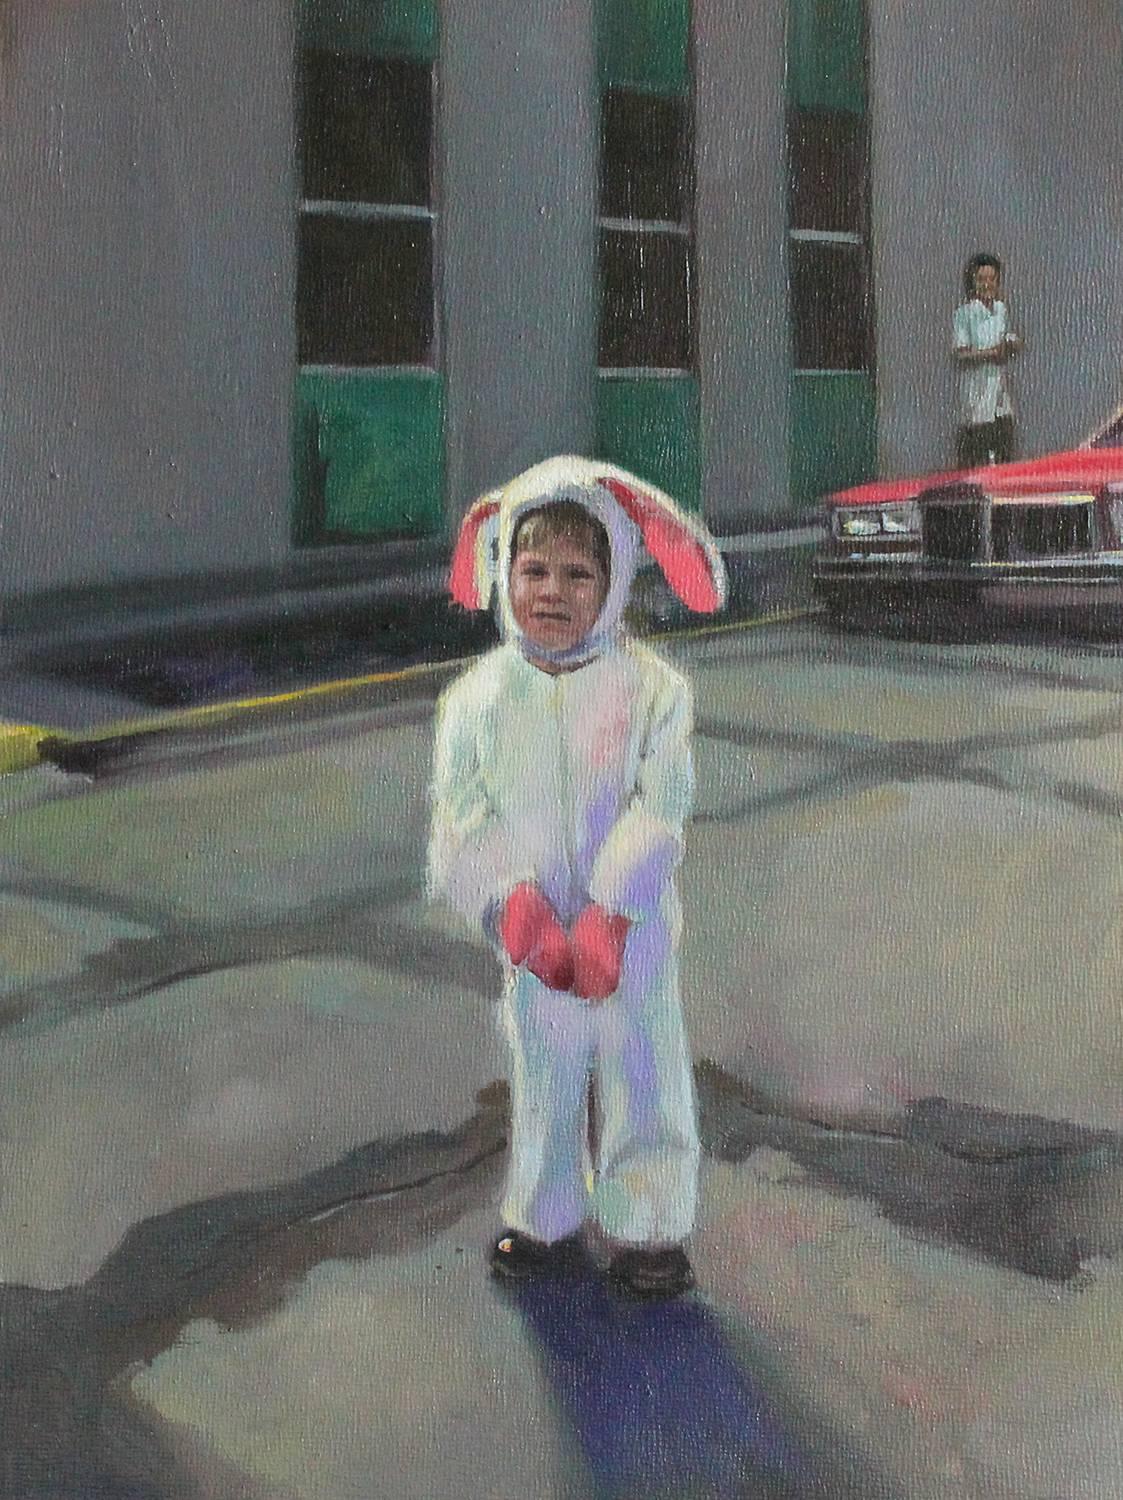 Carl Grauer Figurative Painting - Bunny (Figurative Oil Painting of Vintage Photograph of Child in Bunny Costume)